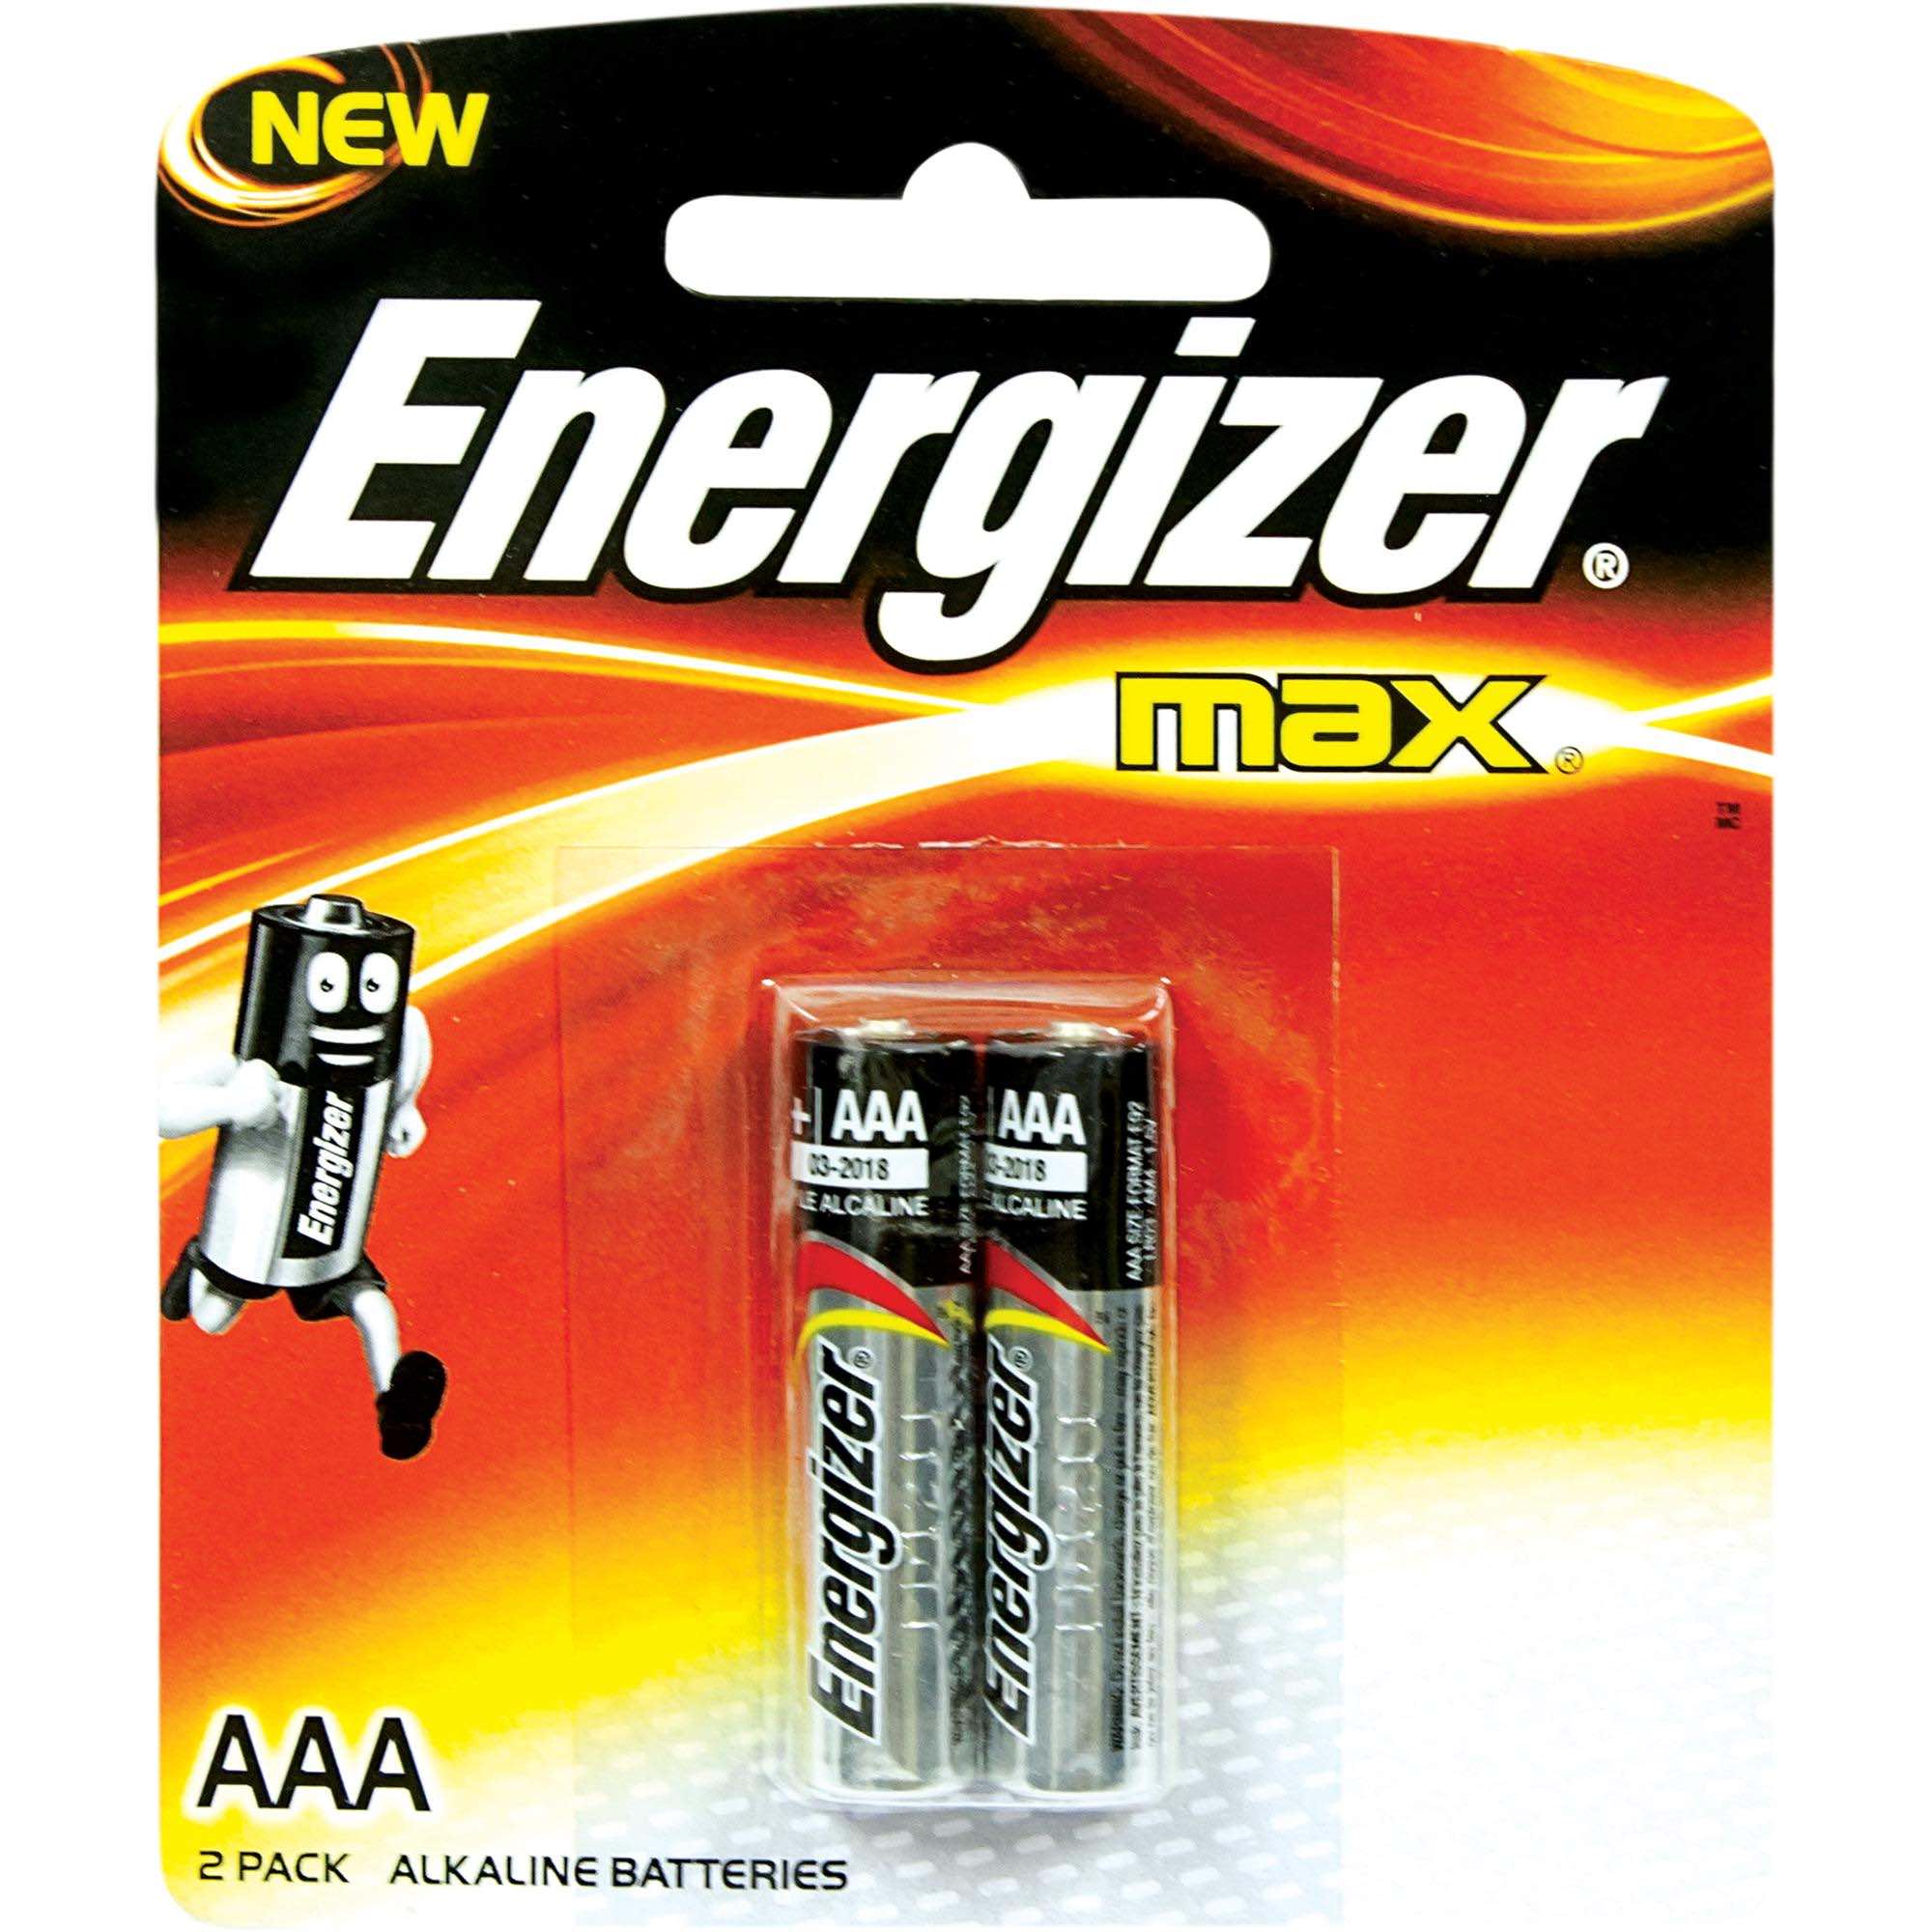 Energizer Max AAA Multipurpose Battery 1.5 Volts 